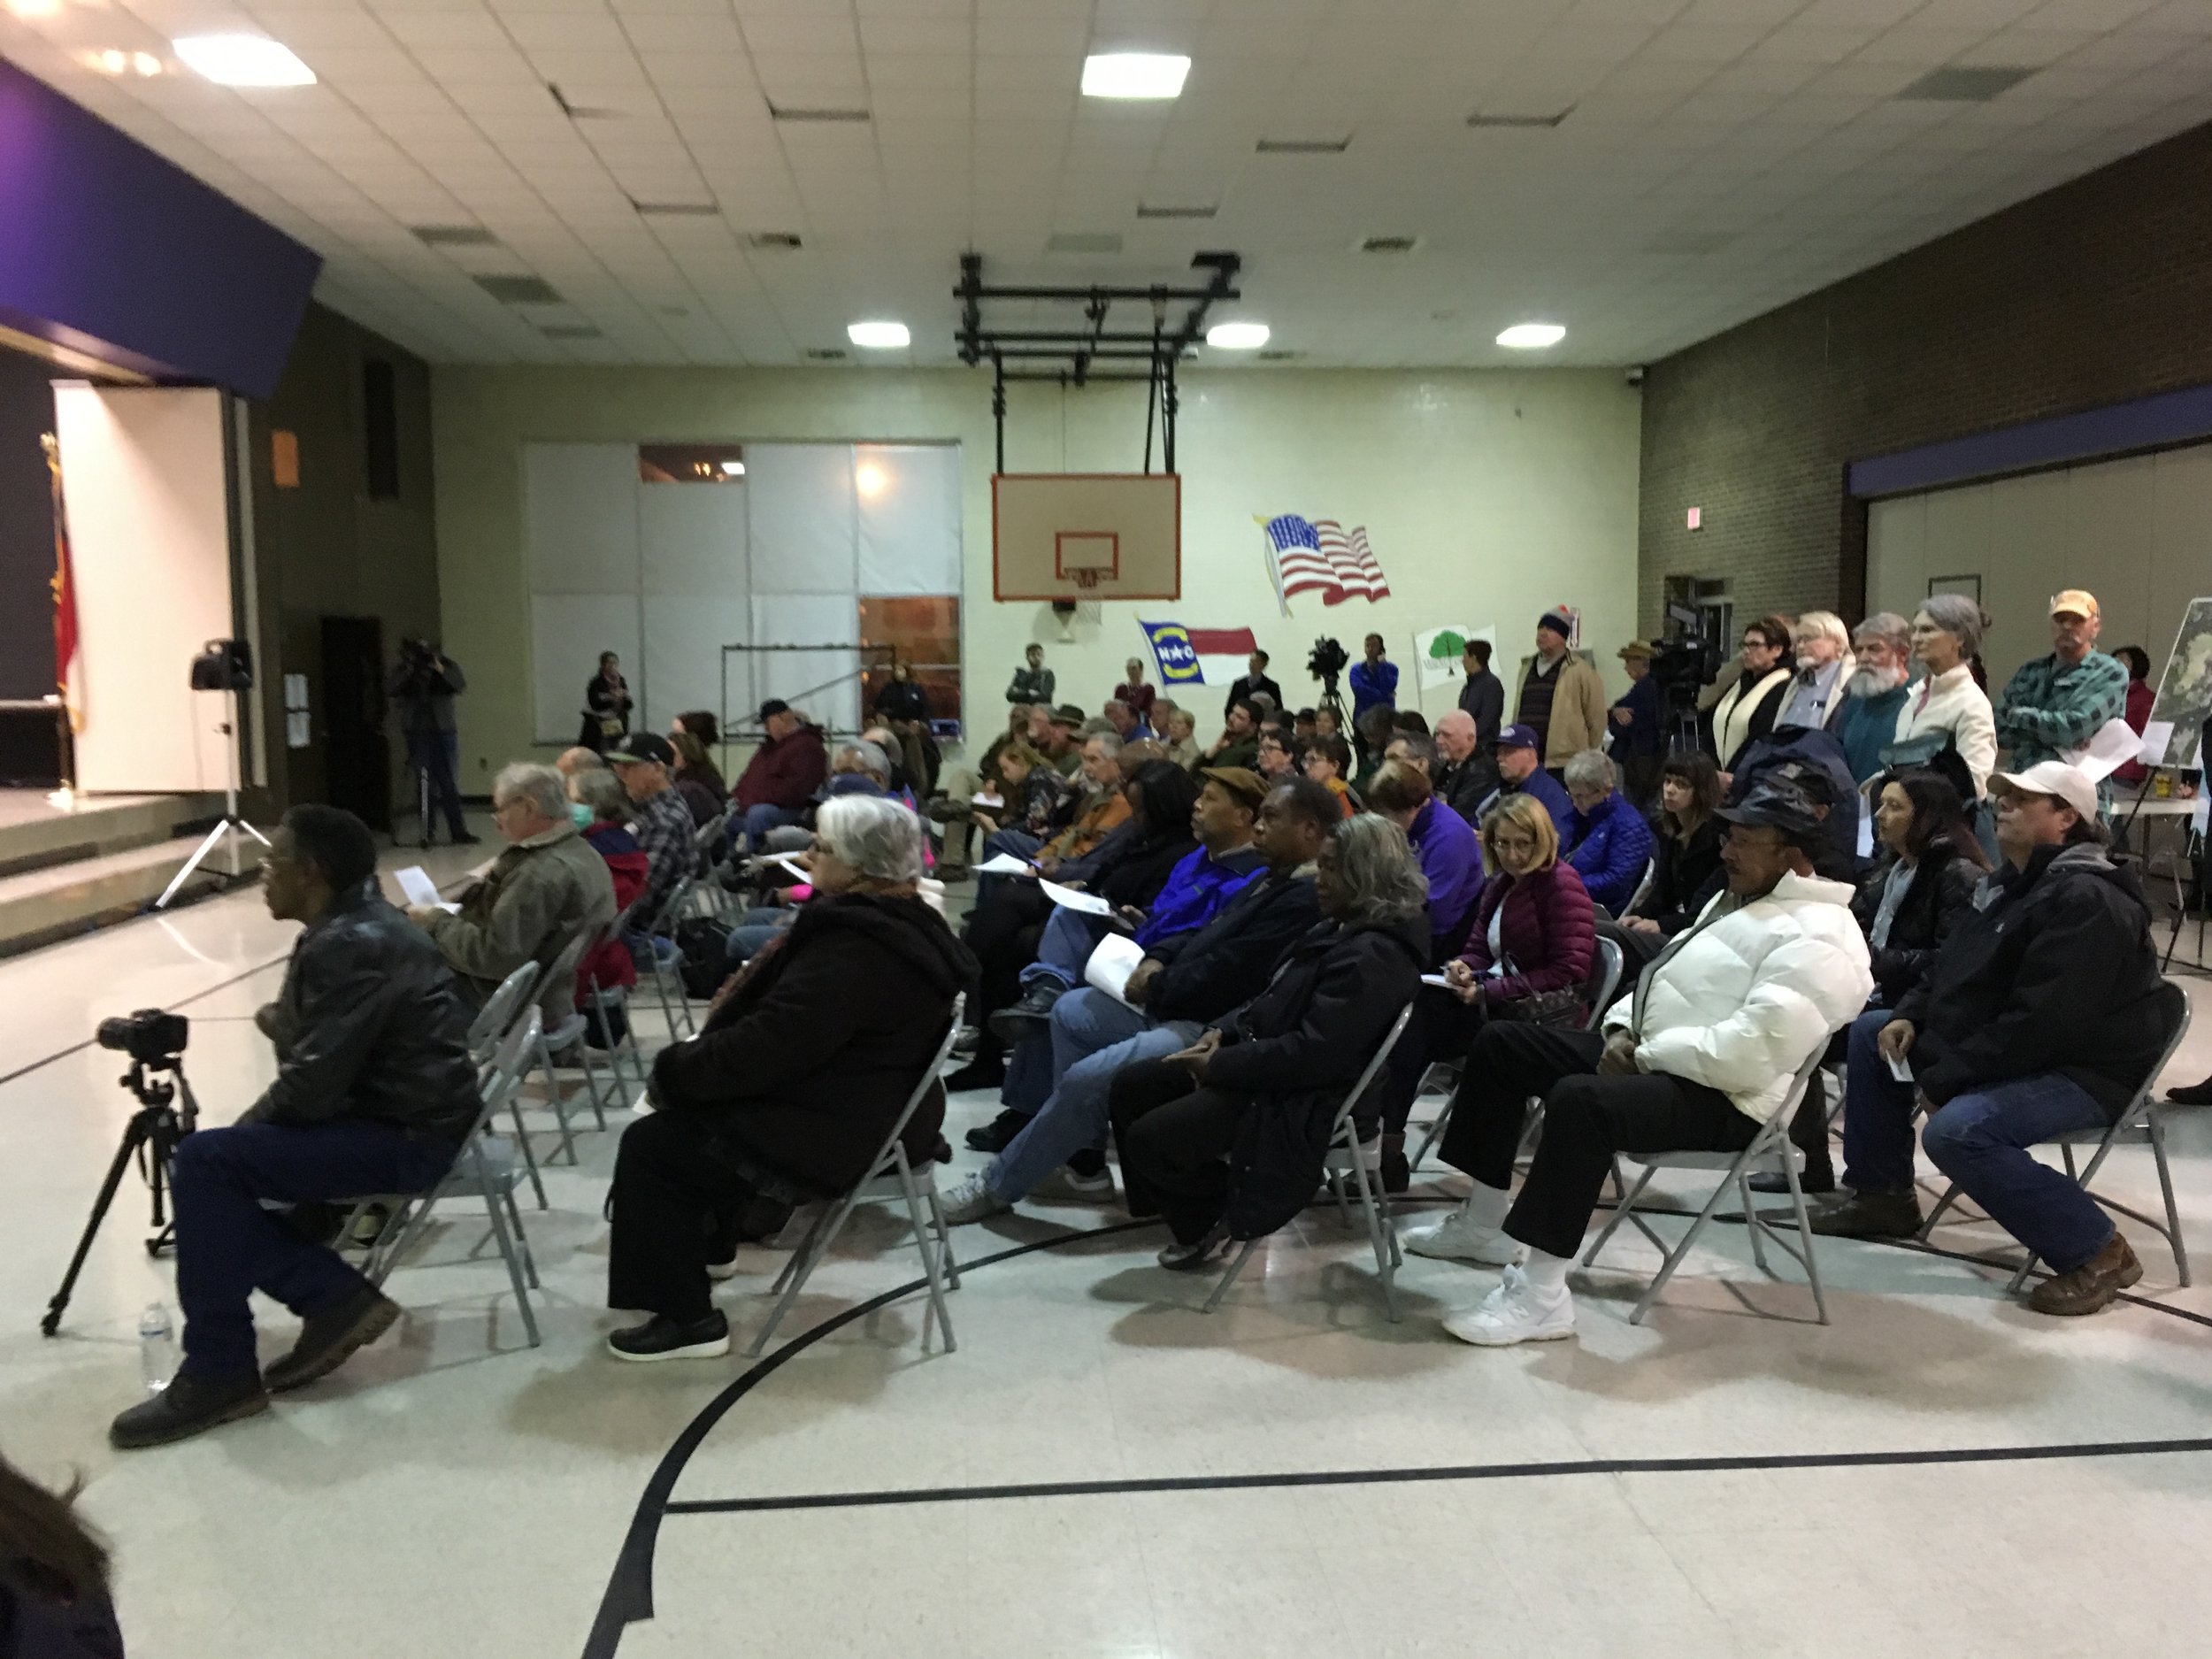 A full house despite the cold weather and numerous impacted community members attending a funeral prior to the event.